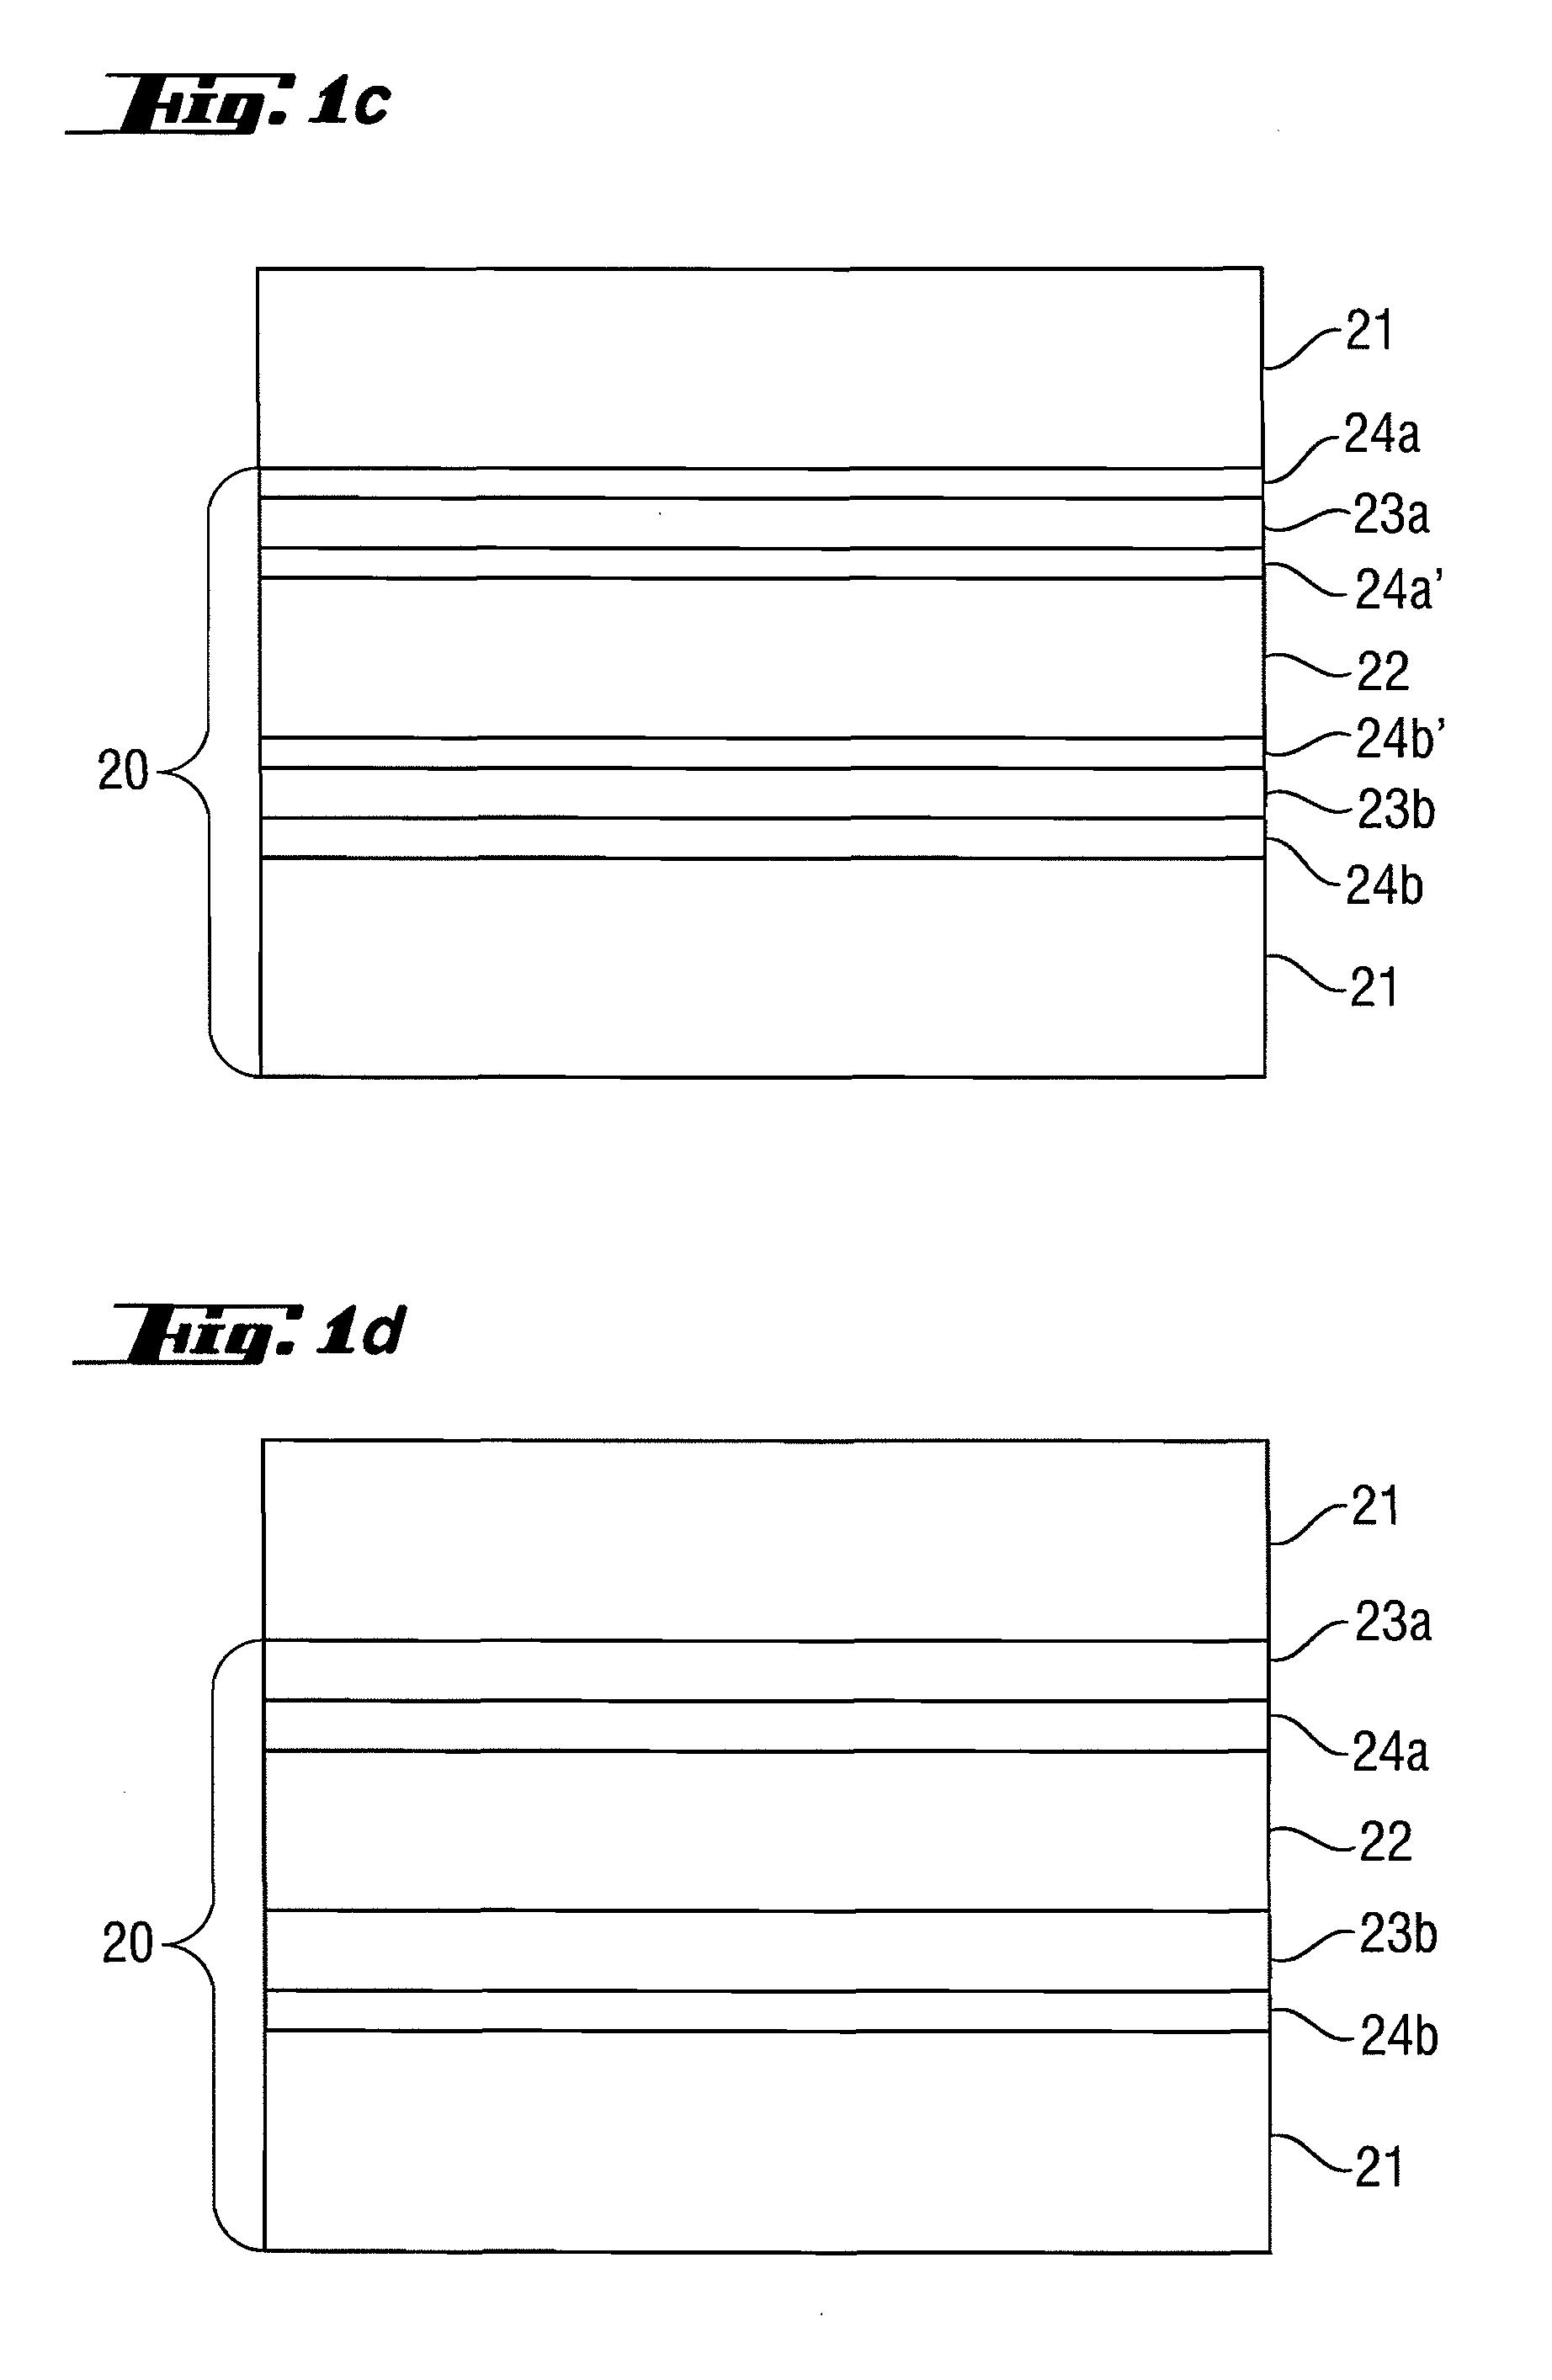 Reflective optical element for EUV lithography device